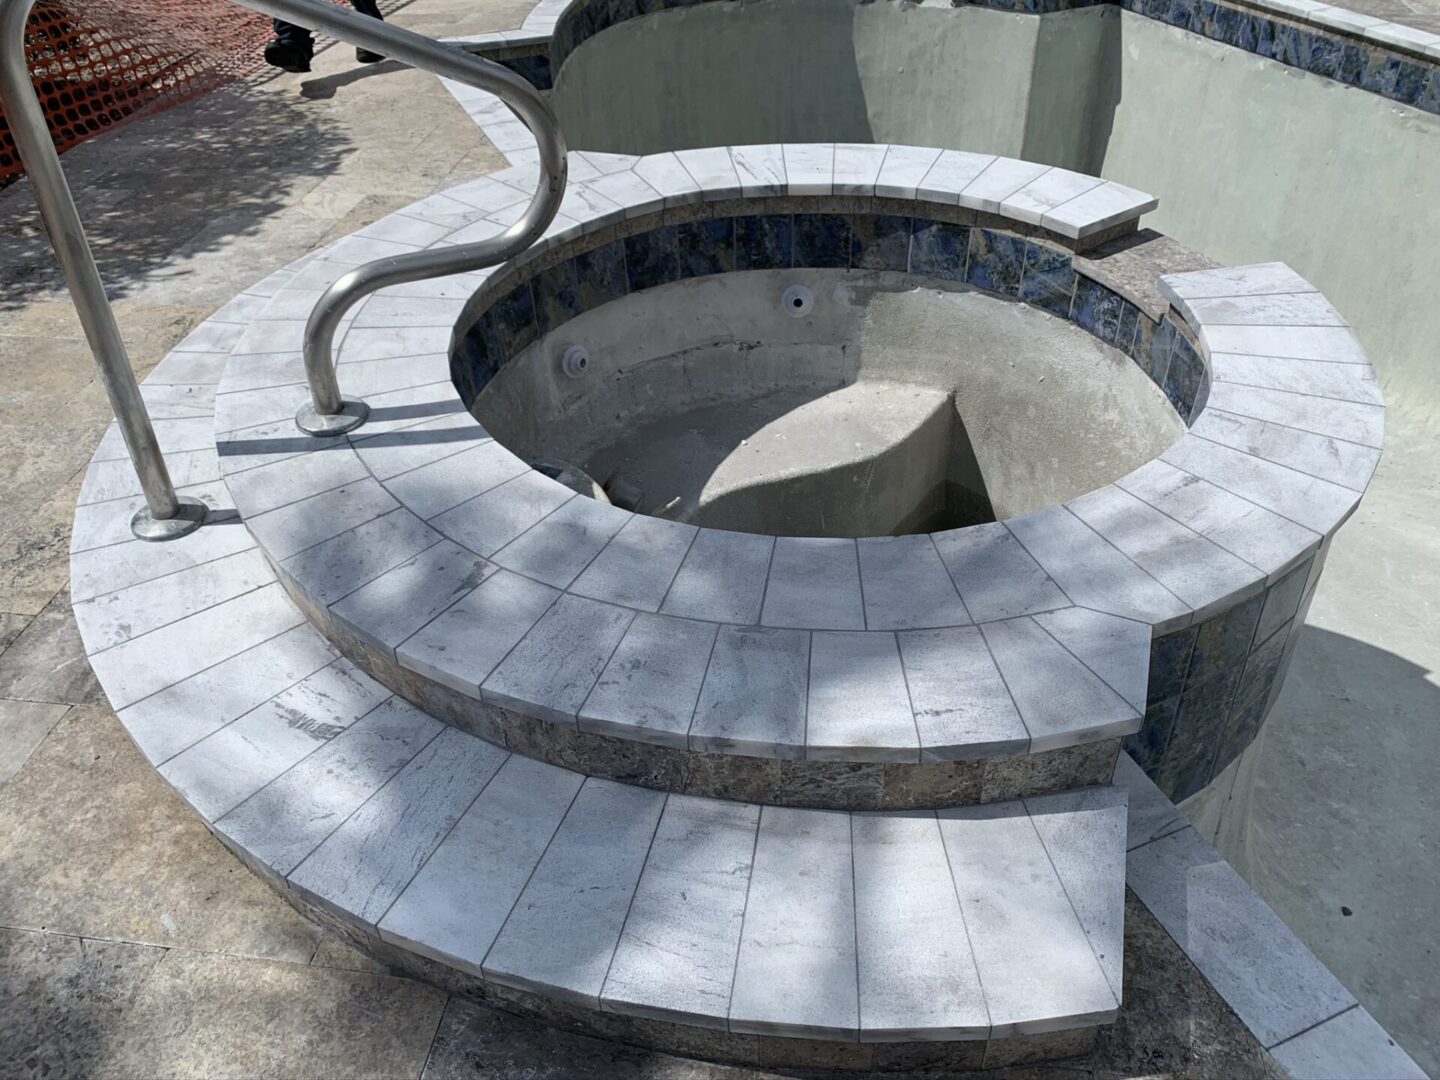 A circular hot tub under construction, featuring a tiled exterior and built-in metal handrails. The interior is not yet finished, showing exposed concrete. The area around is paved.